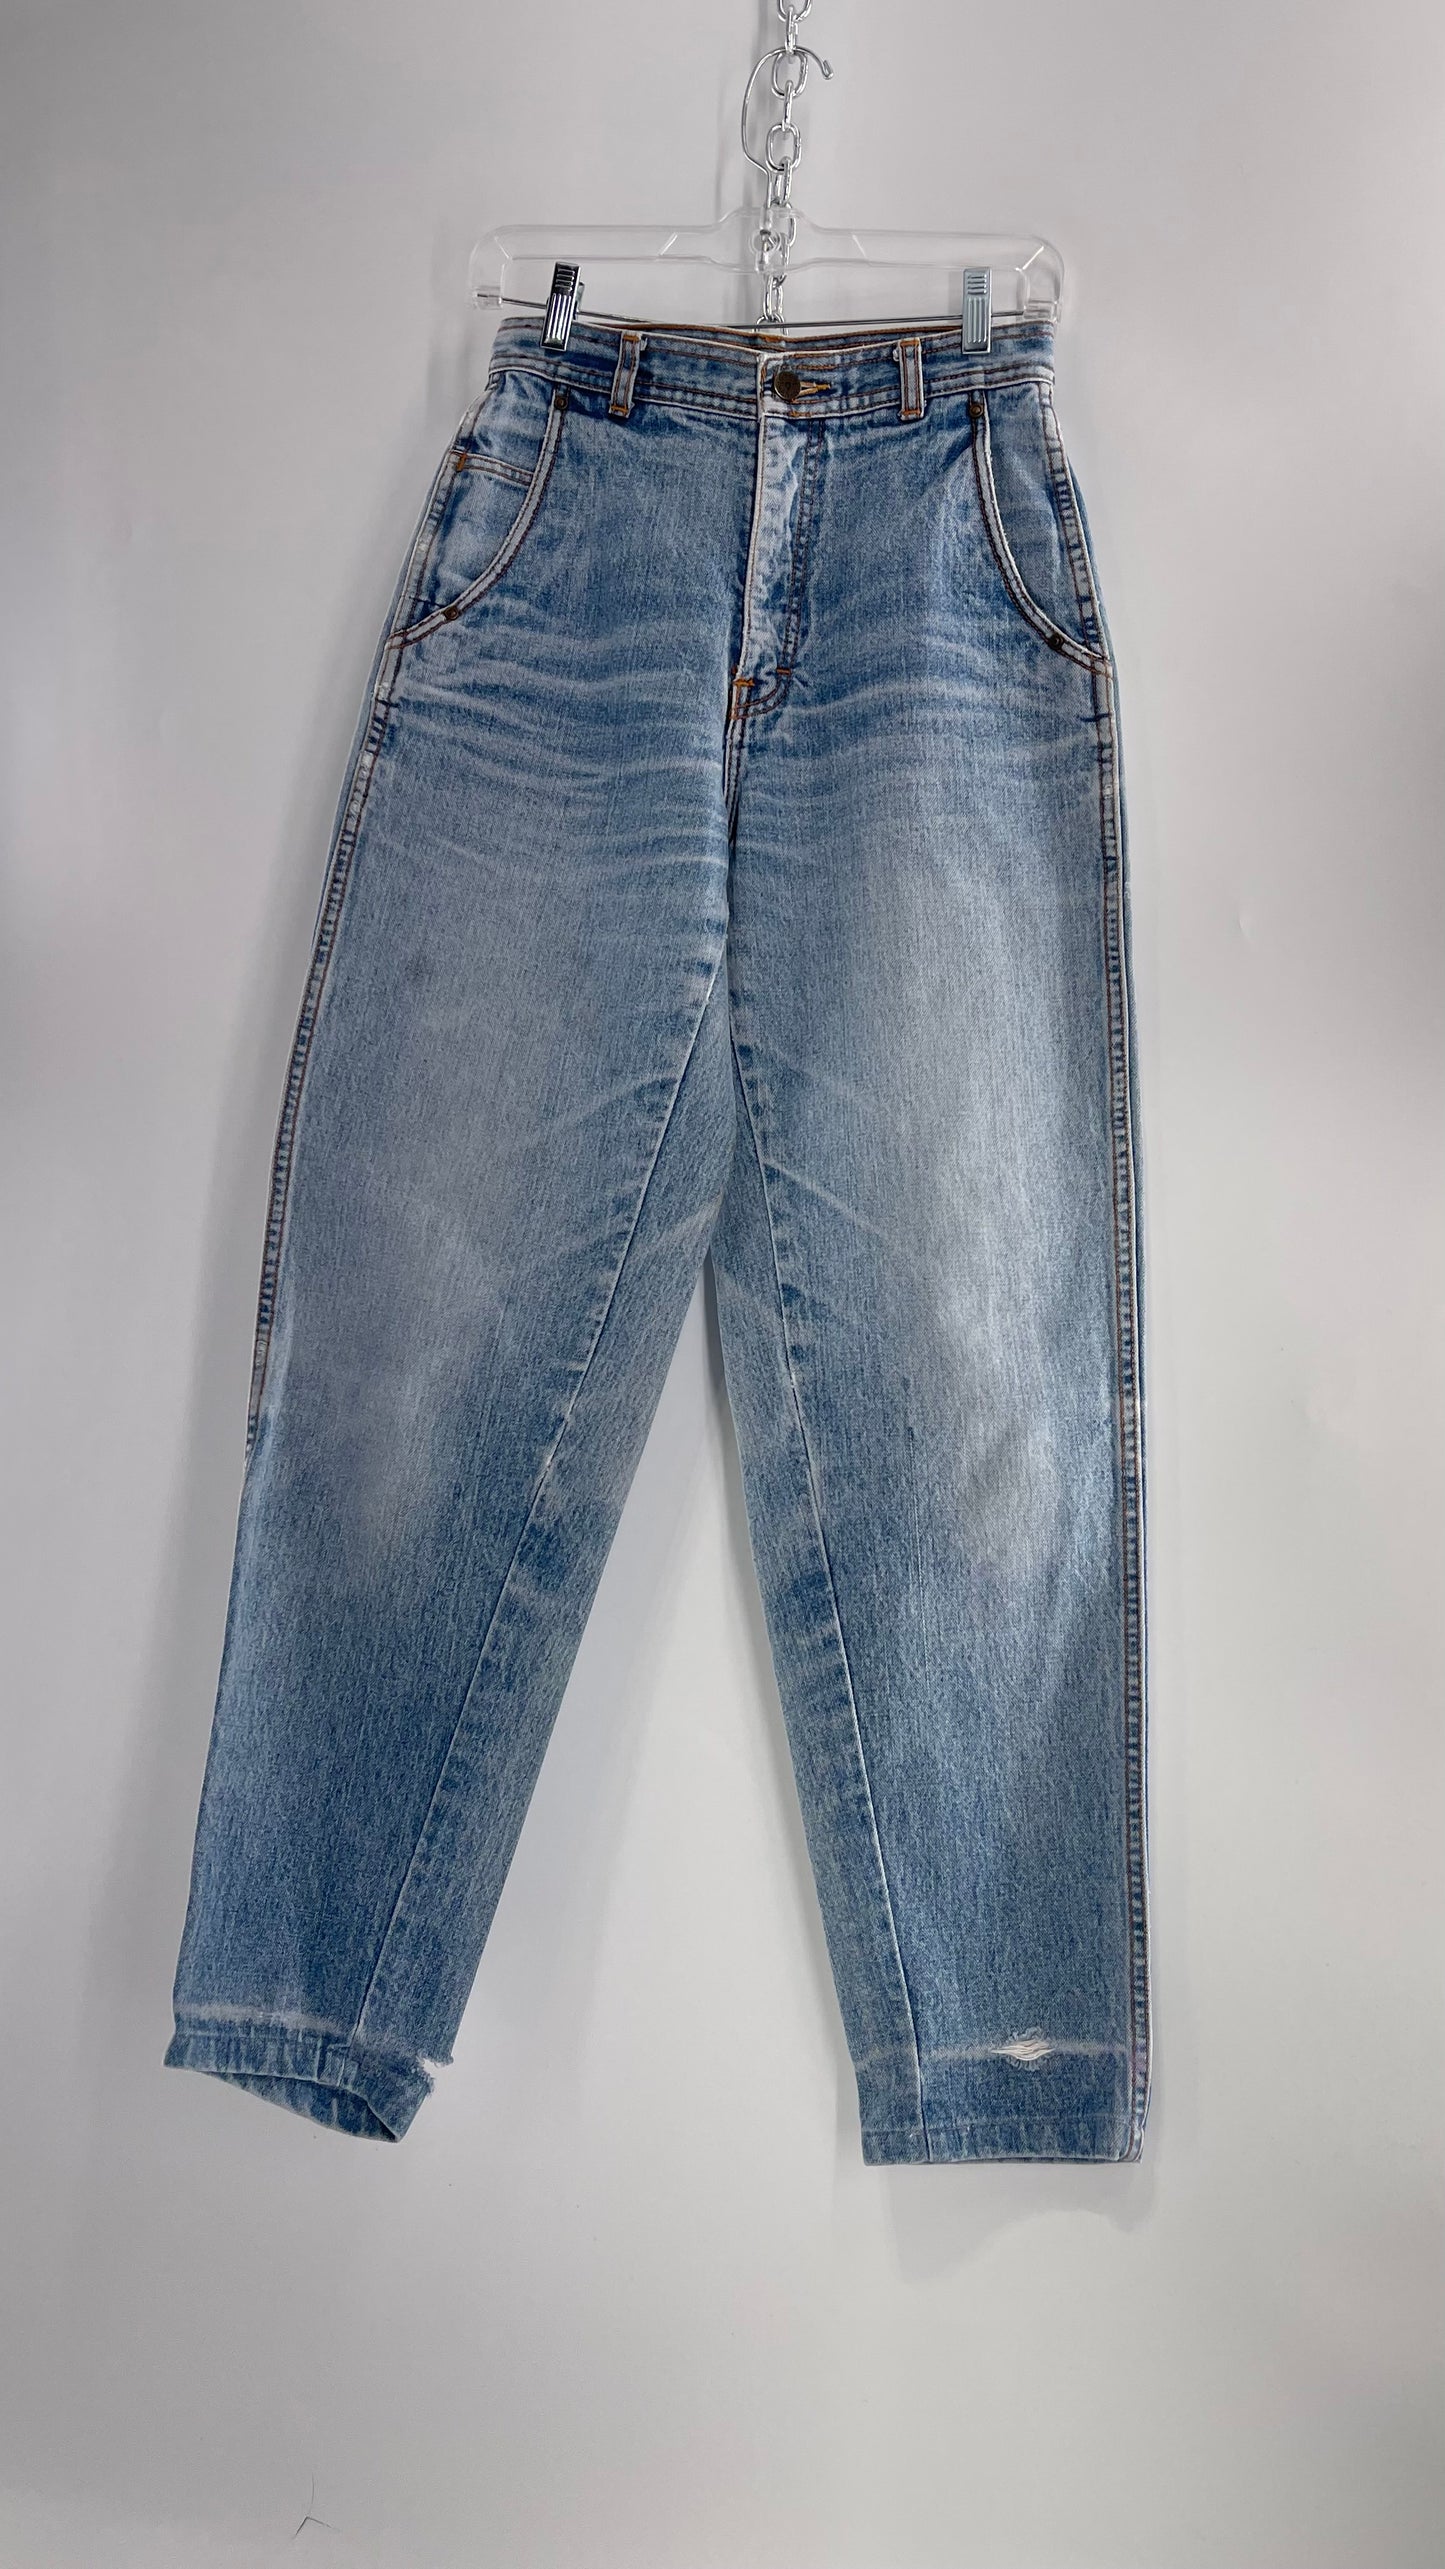 Vintage Sergio Valente Light Blue Ultra High Waisted Mom Jeans with Distressing (28)